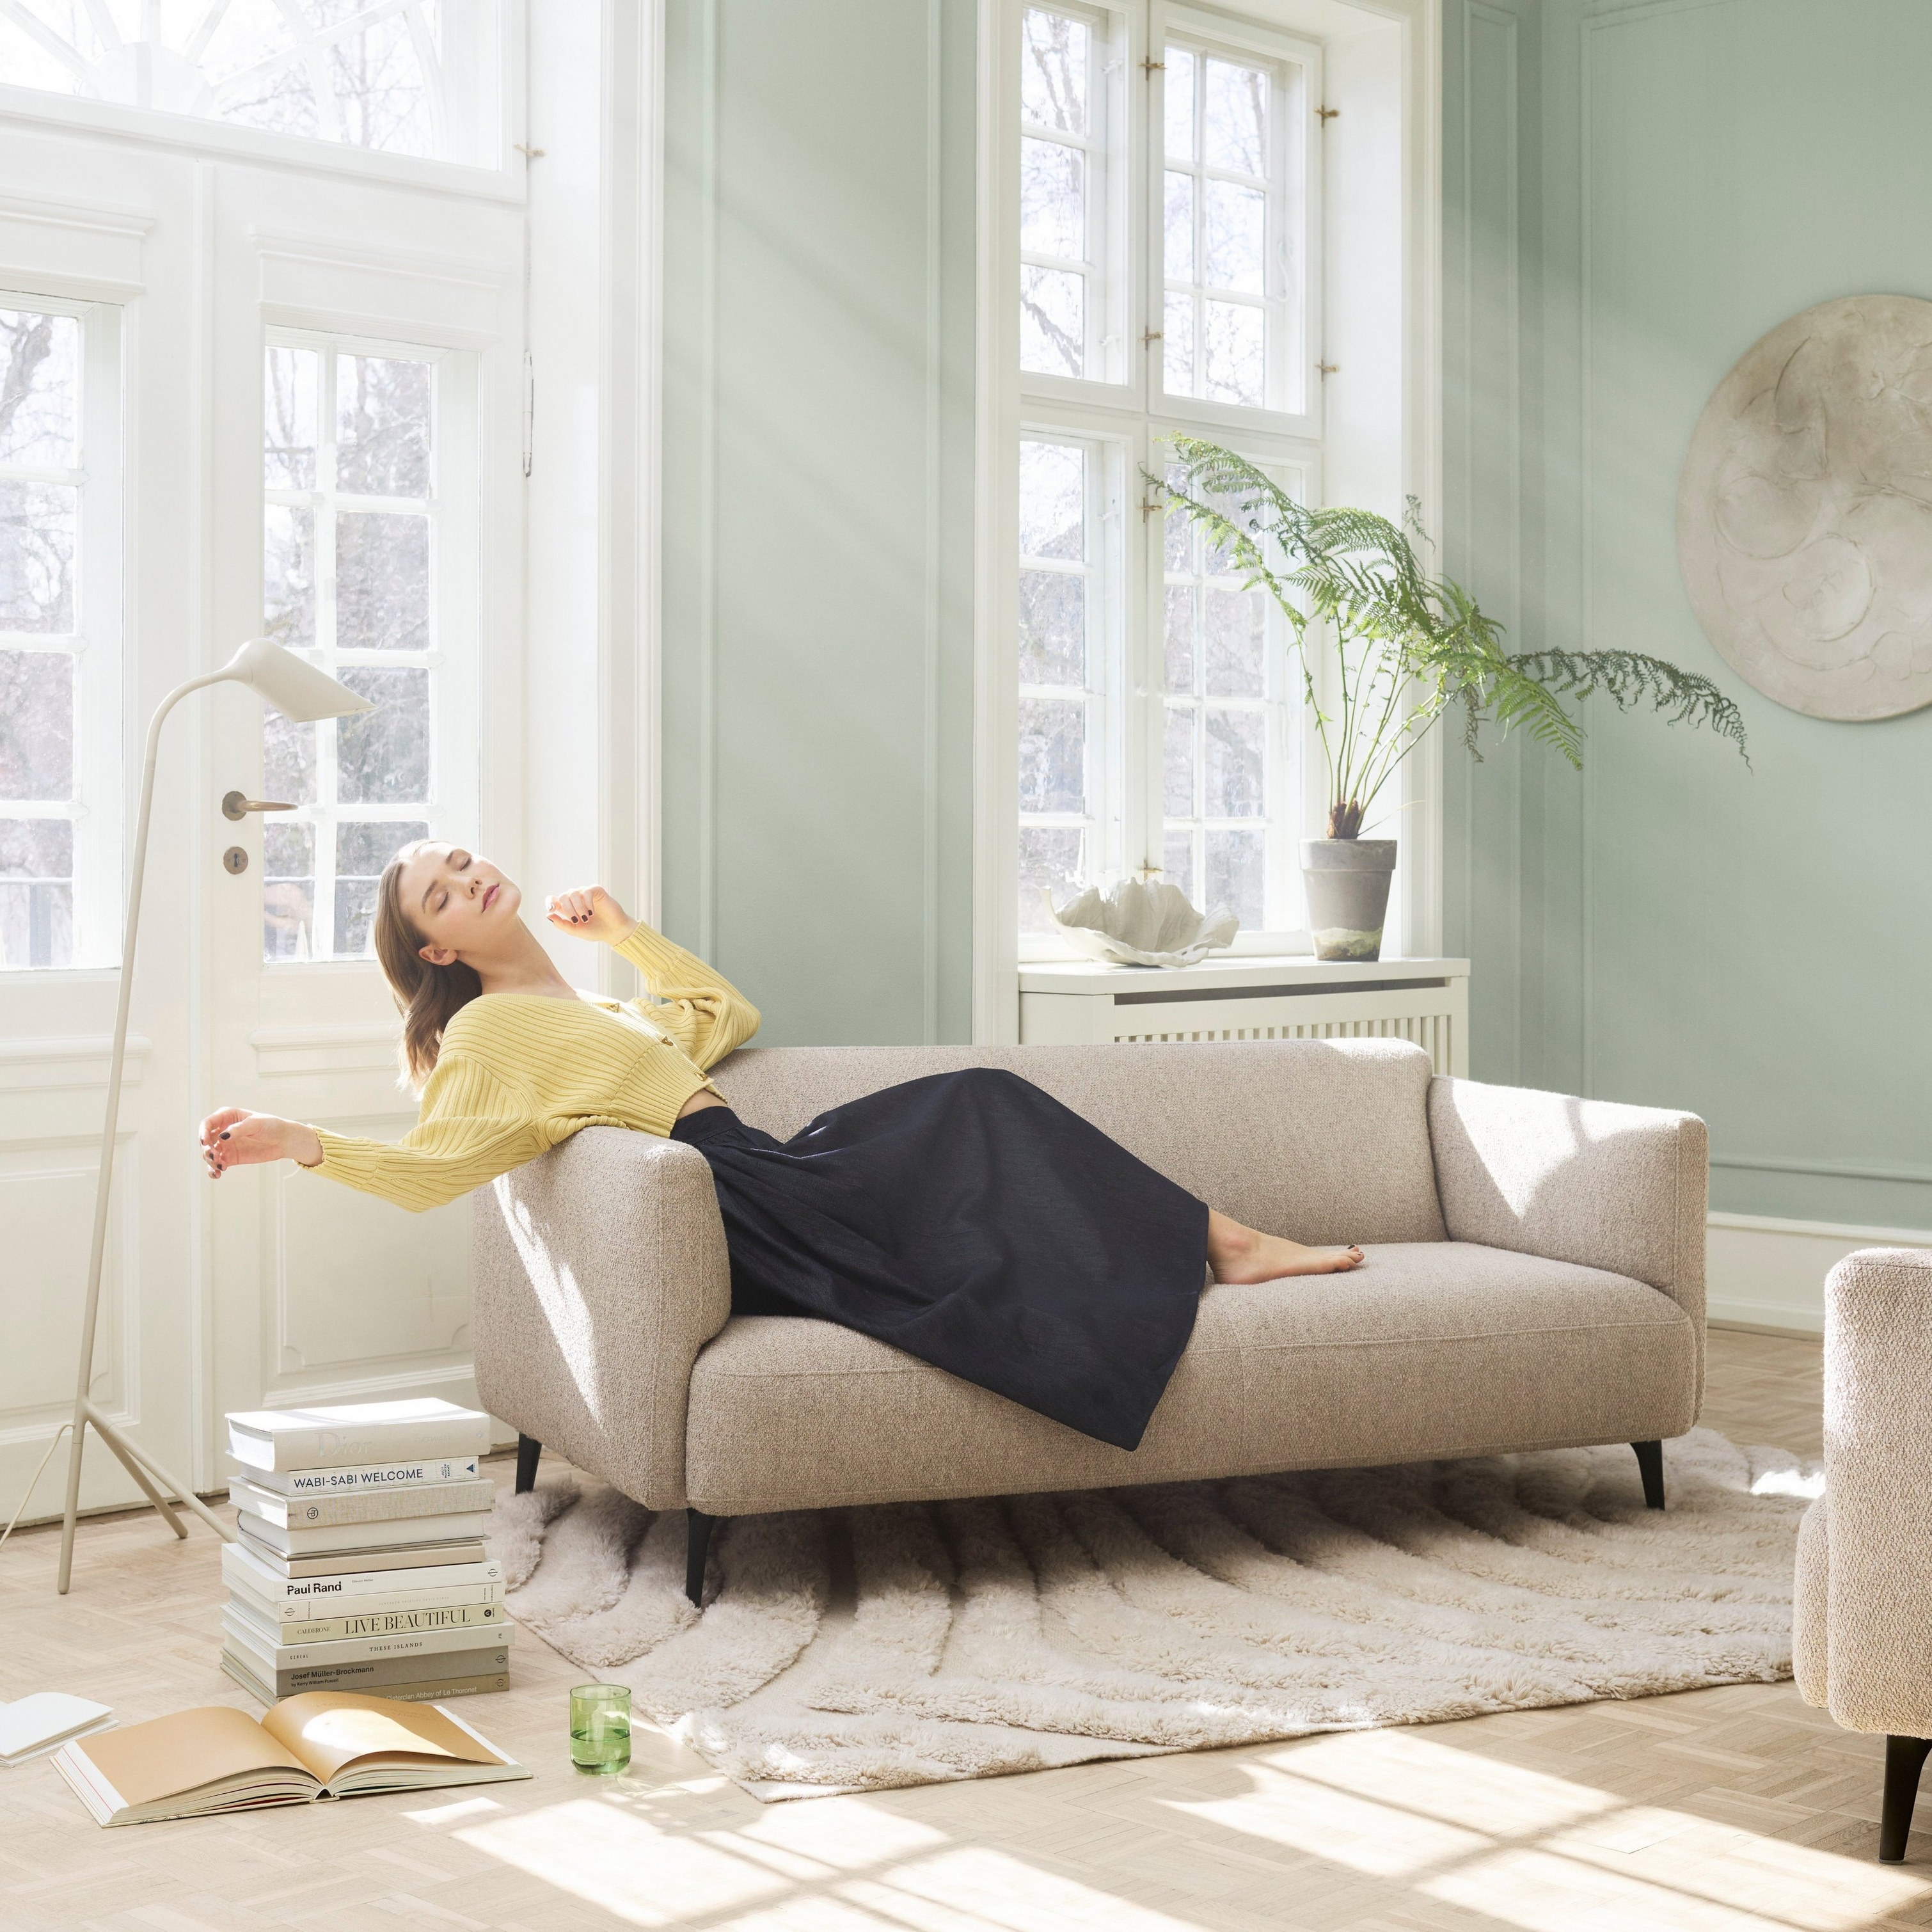 Woman lounging on the Modena sofa in a light-filled living room.